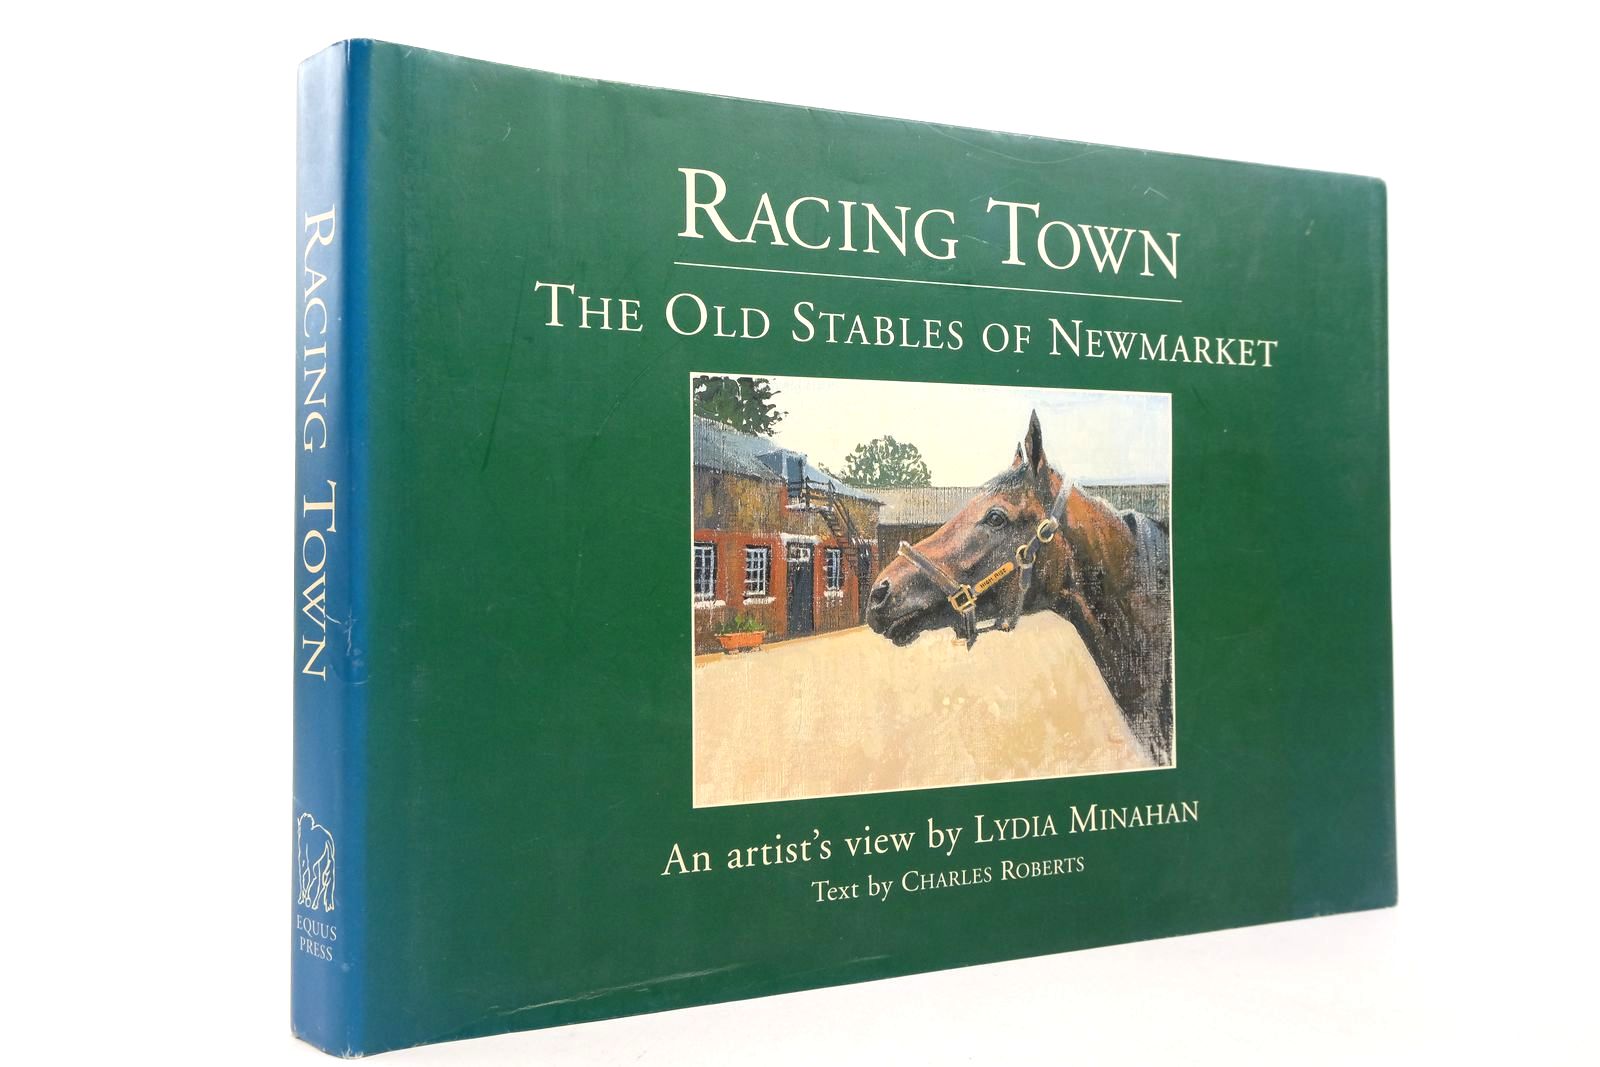 Photo of RACING TOWN: THE OLD STABLES OF NEWMARKET written by Roberts, Charles illustrated by Minahan, Lydia published by Equus Press (STOCK CODE: 2140062)  for sale by Stella & Rose's Books